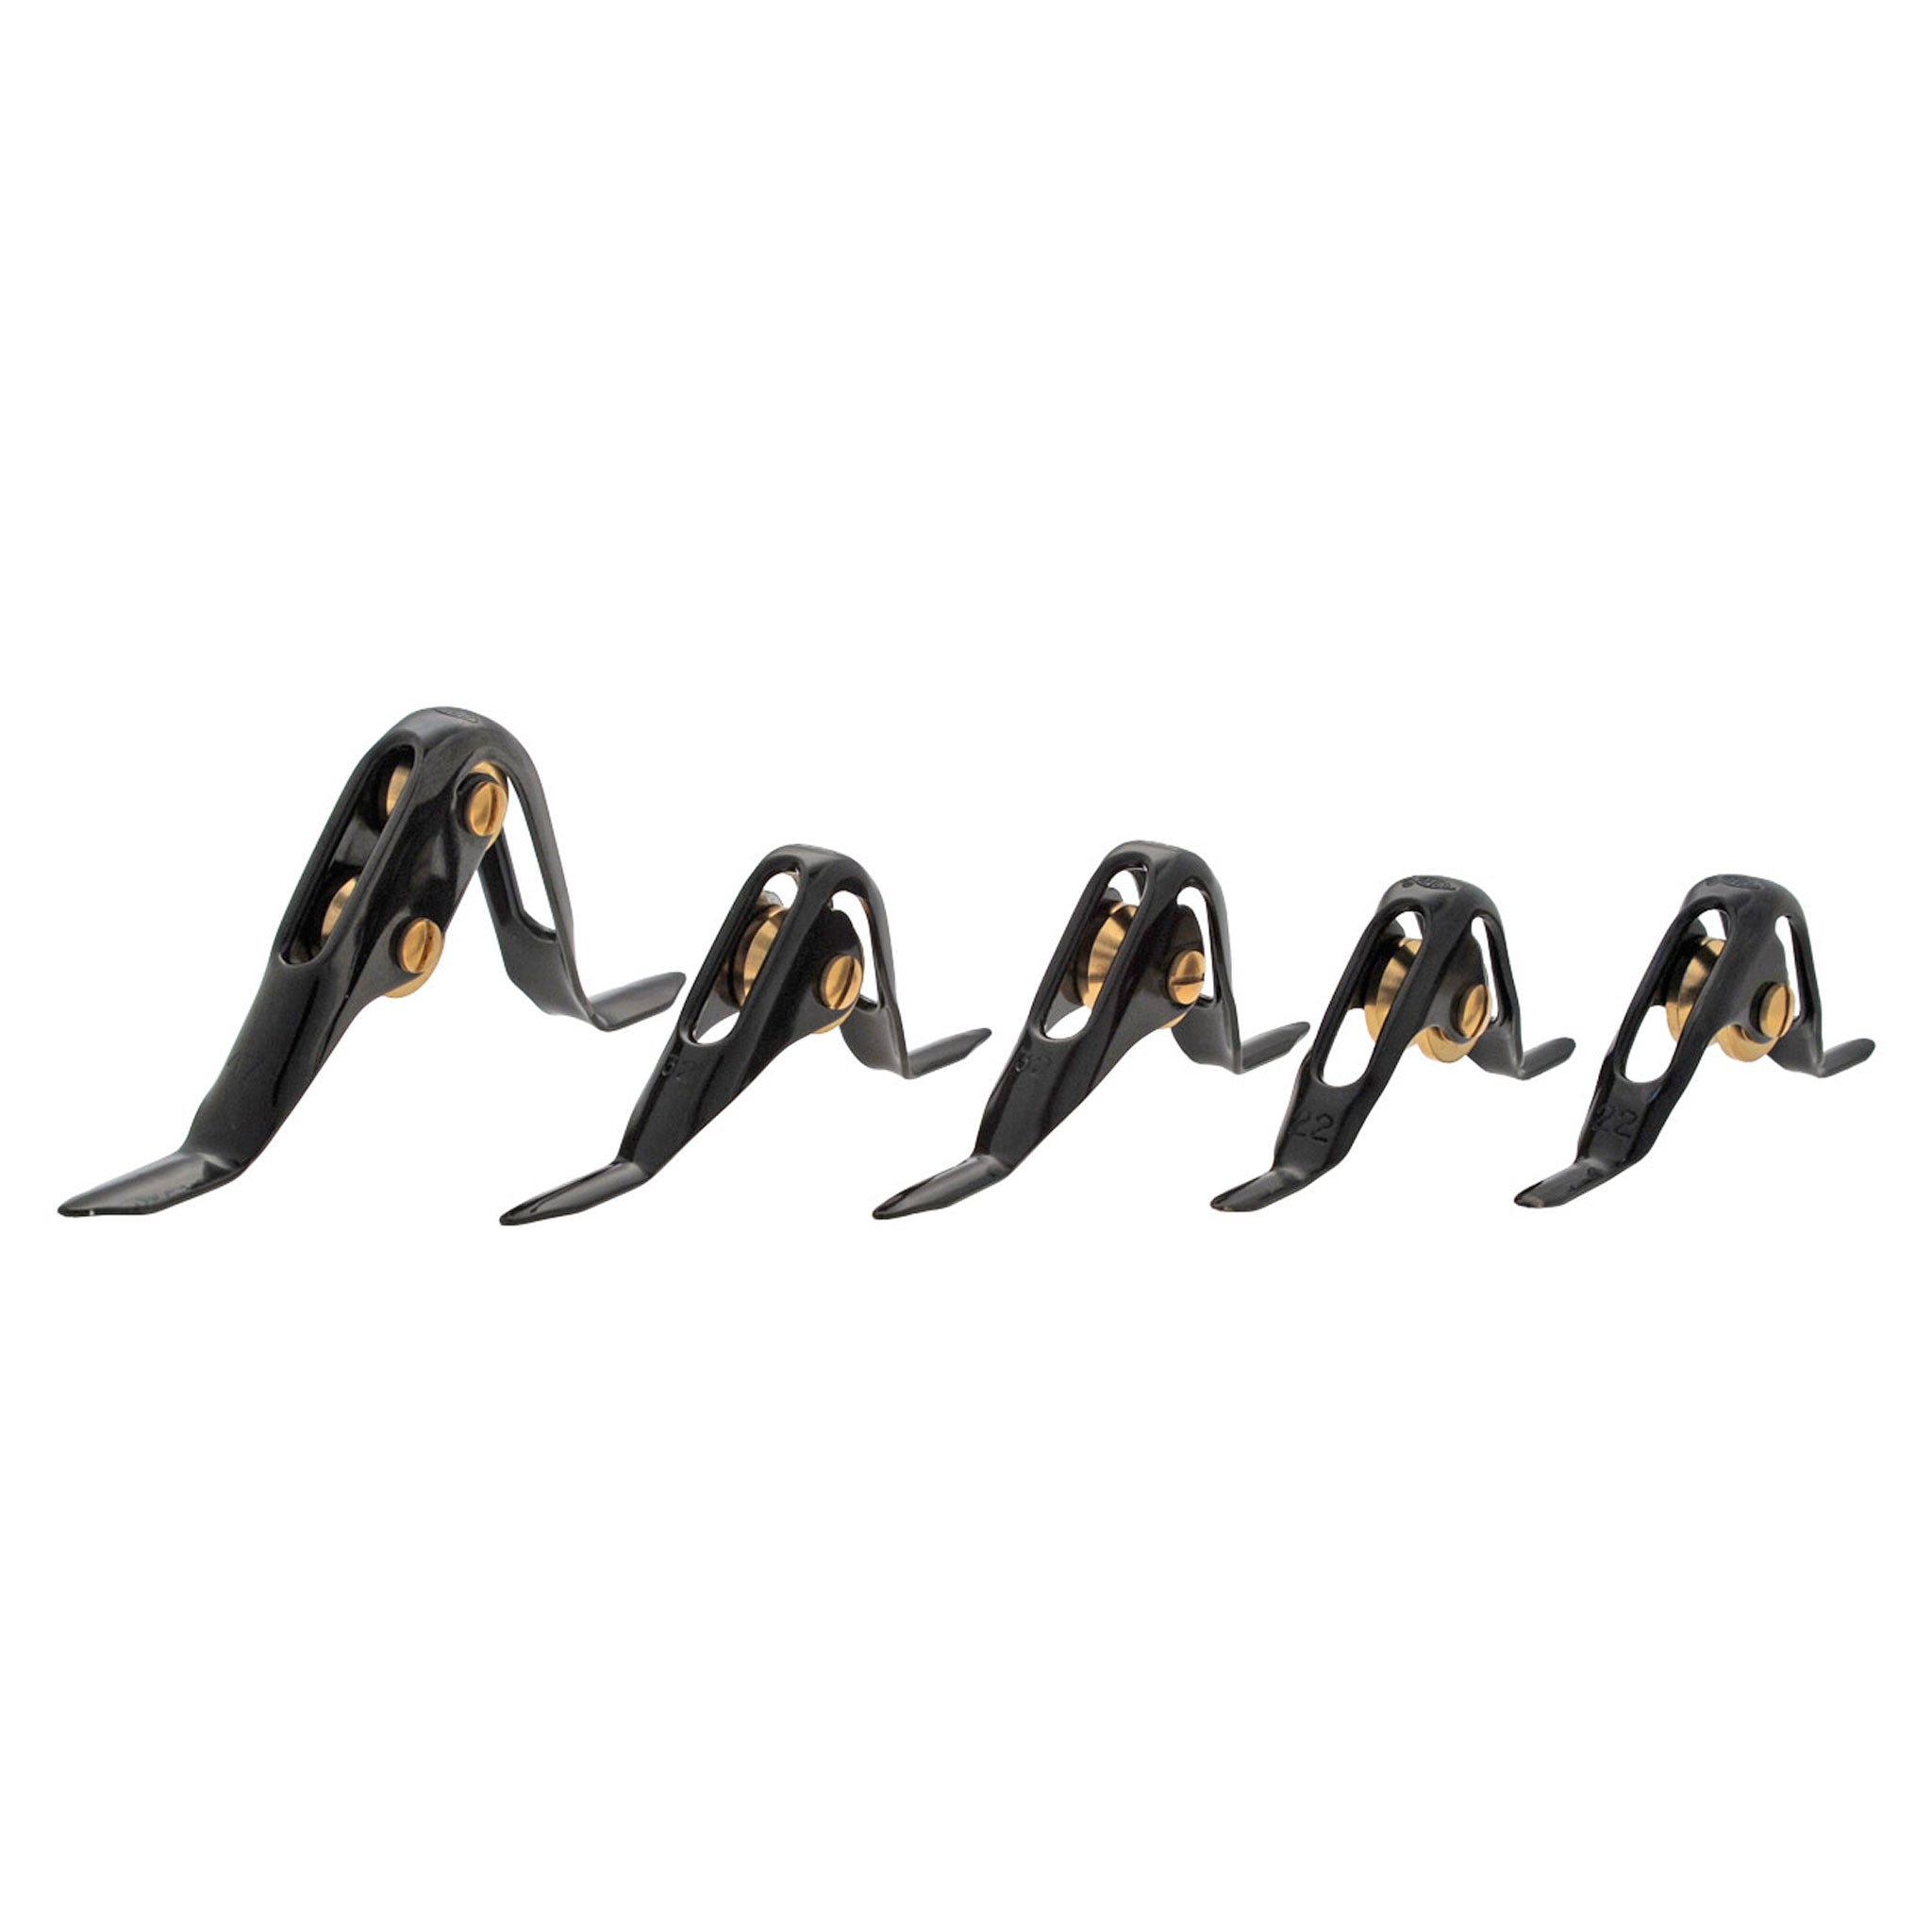 Aftco Big Foot Wind-on Roller Guide Set - Capt. Harry's Fishing Supply